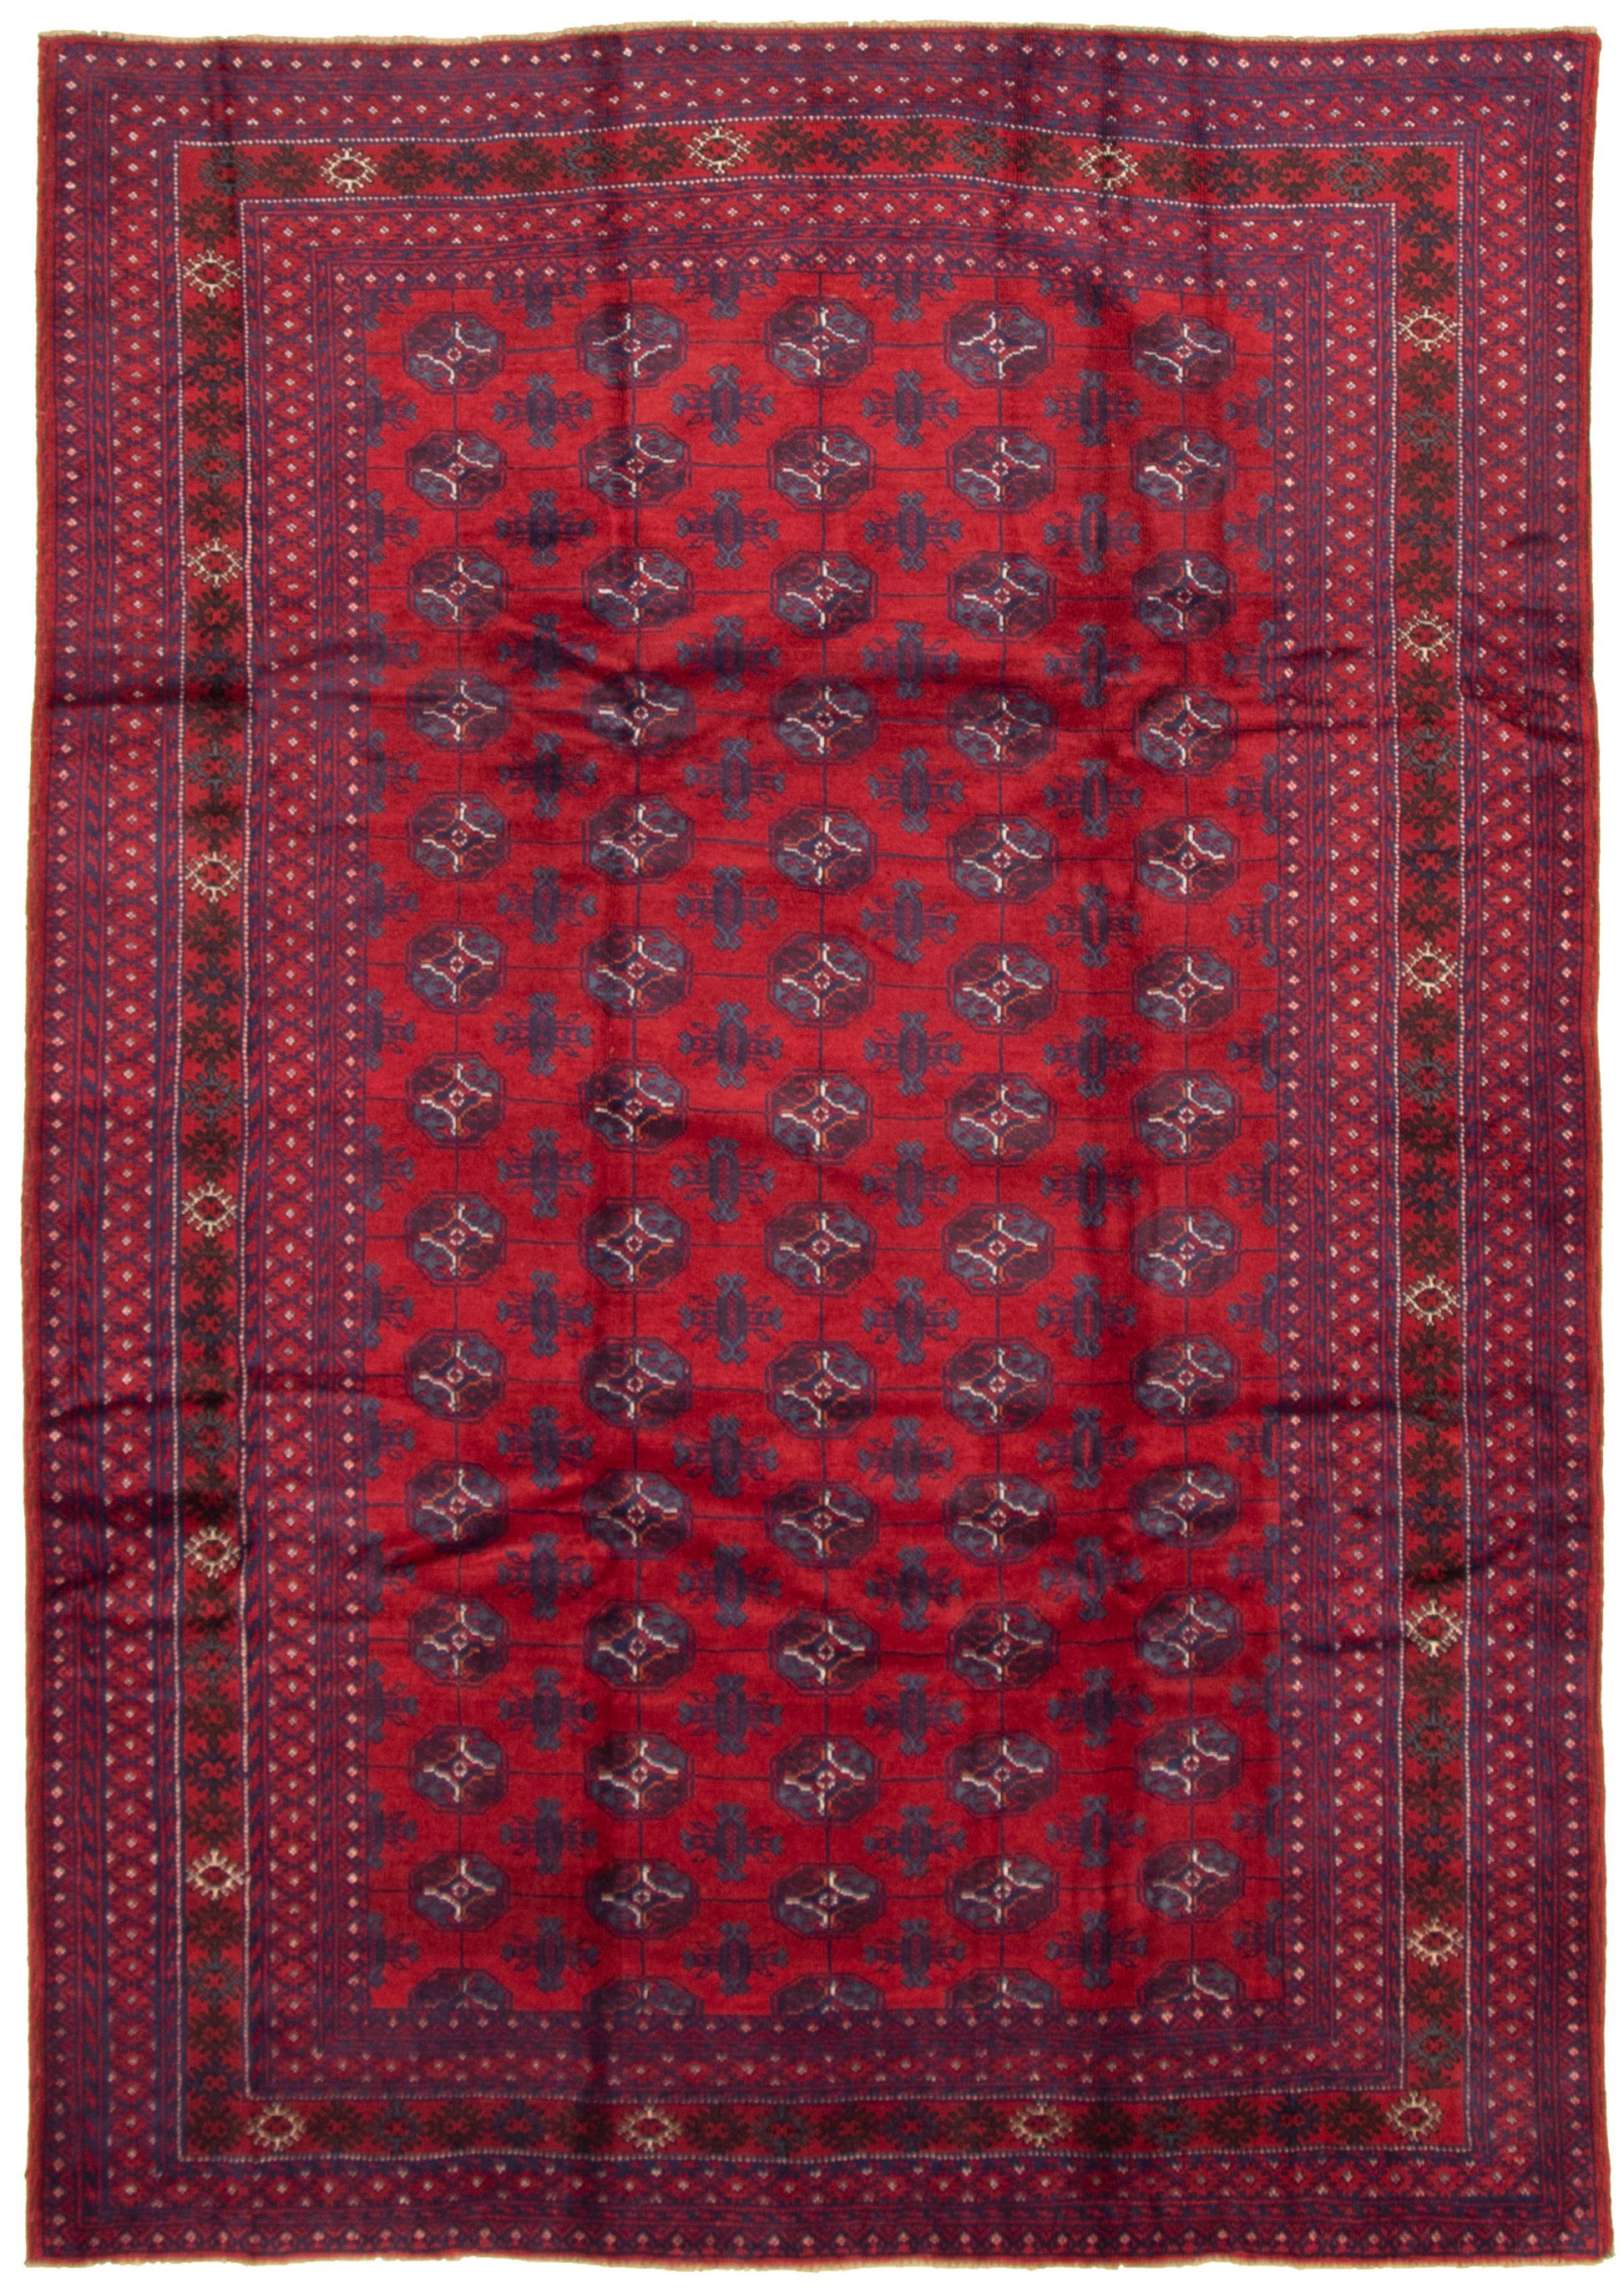 Hand-knotted Teimani Red Wool Rug 6'9" x 9'6"  Size: 6'9" x 9'6"  